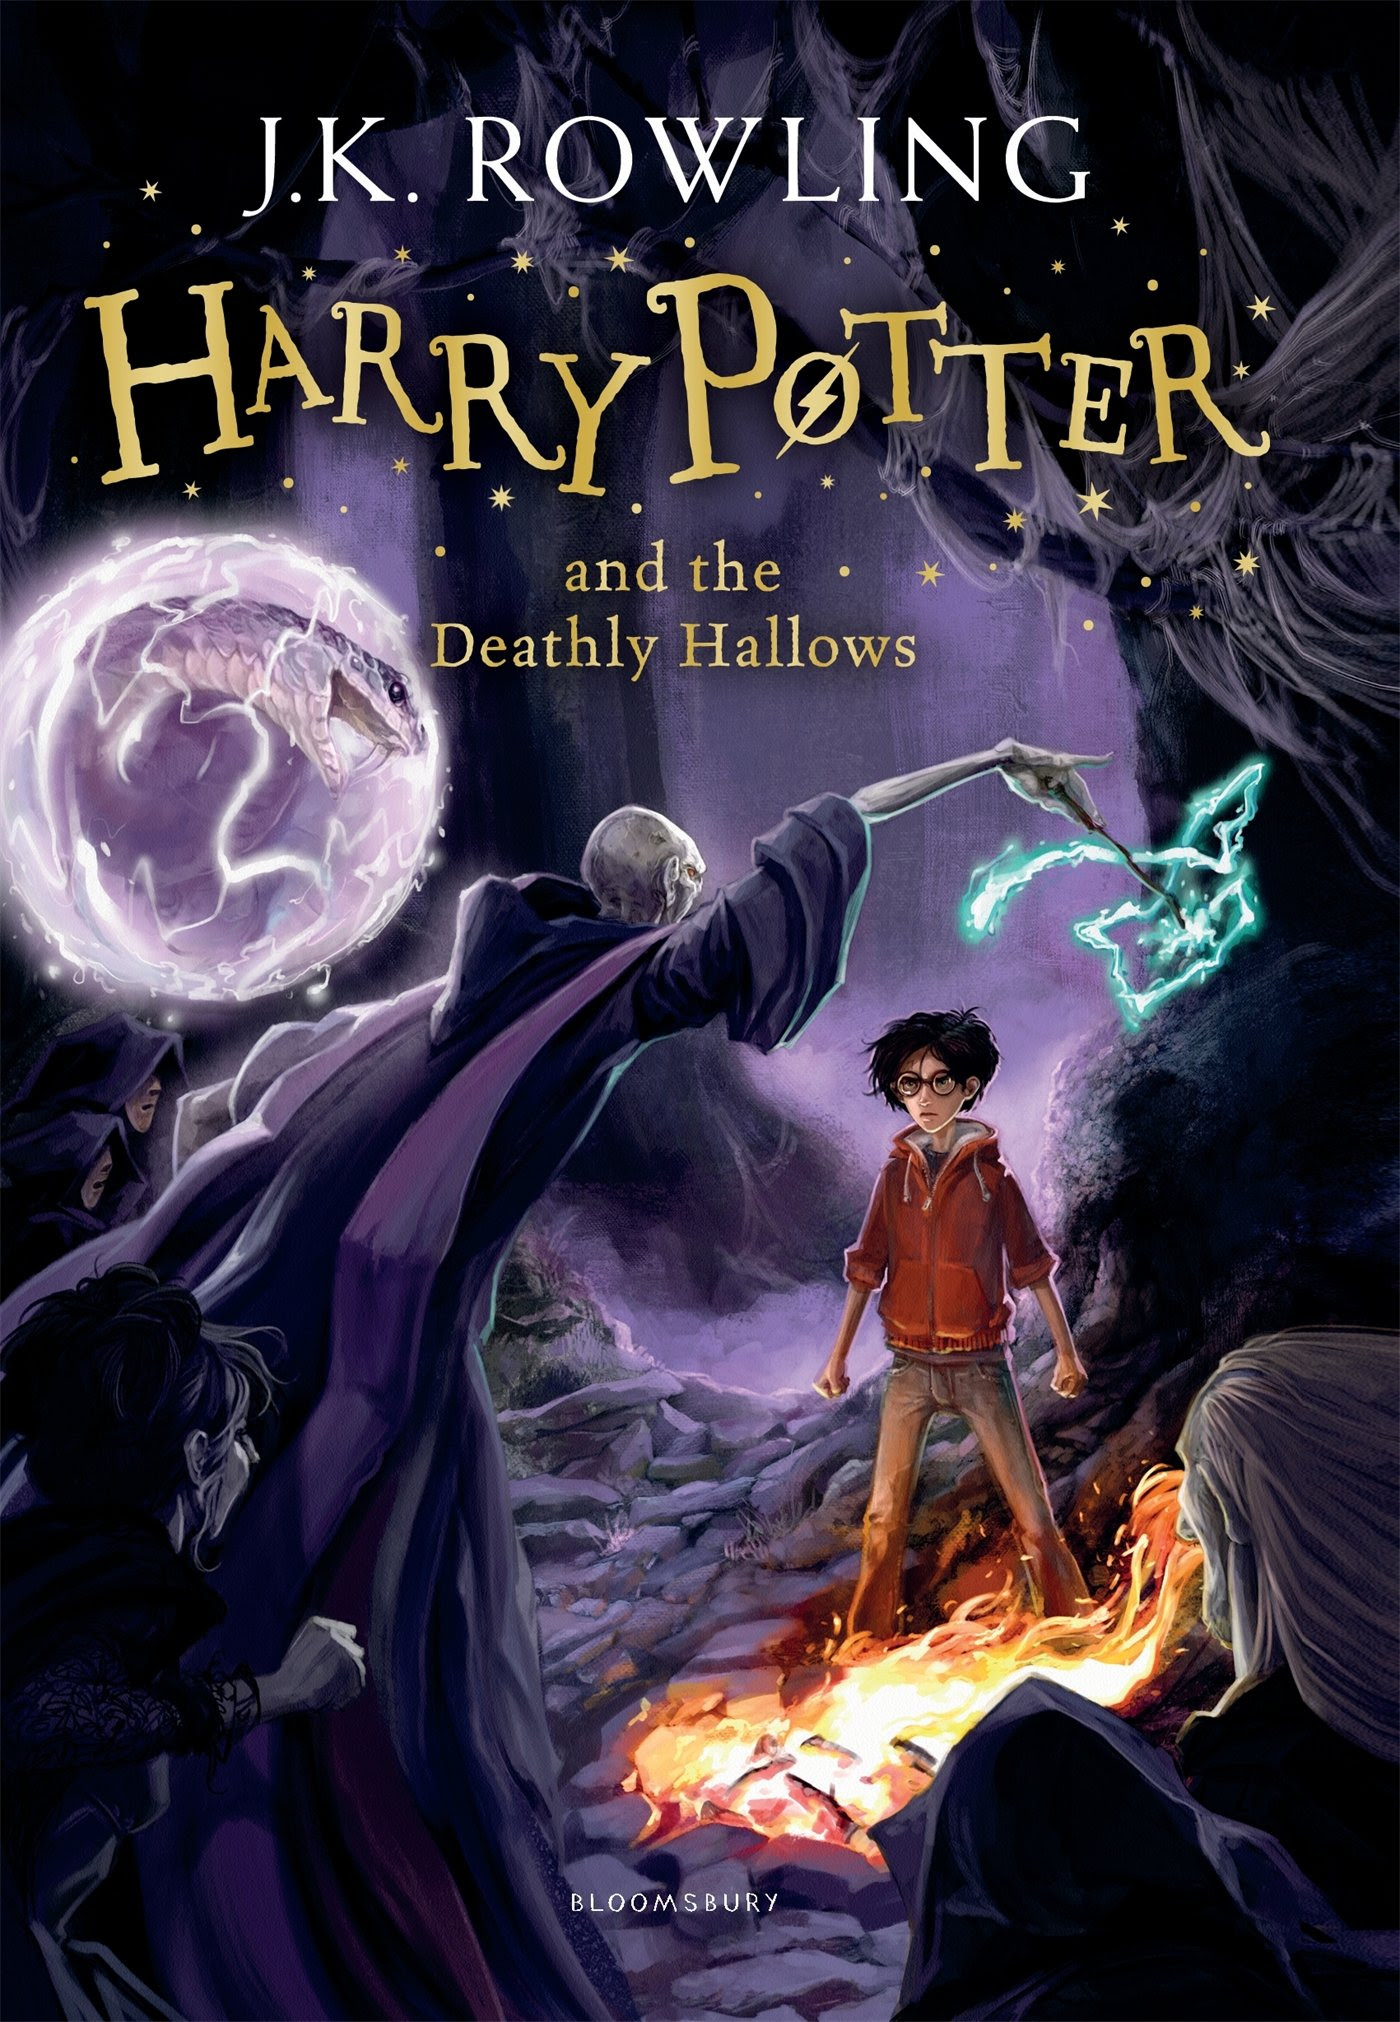 Harry Potter and the Deathly Hallows (Harry Potter, #7) EPUB